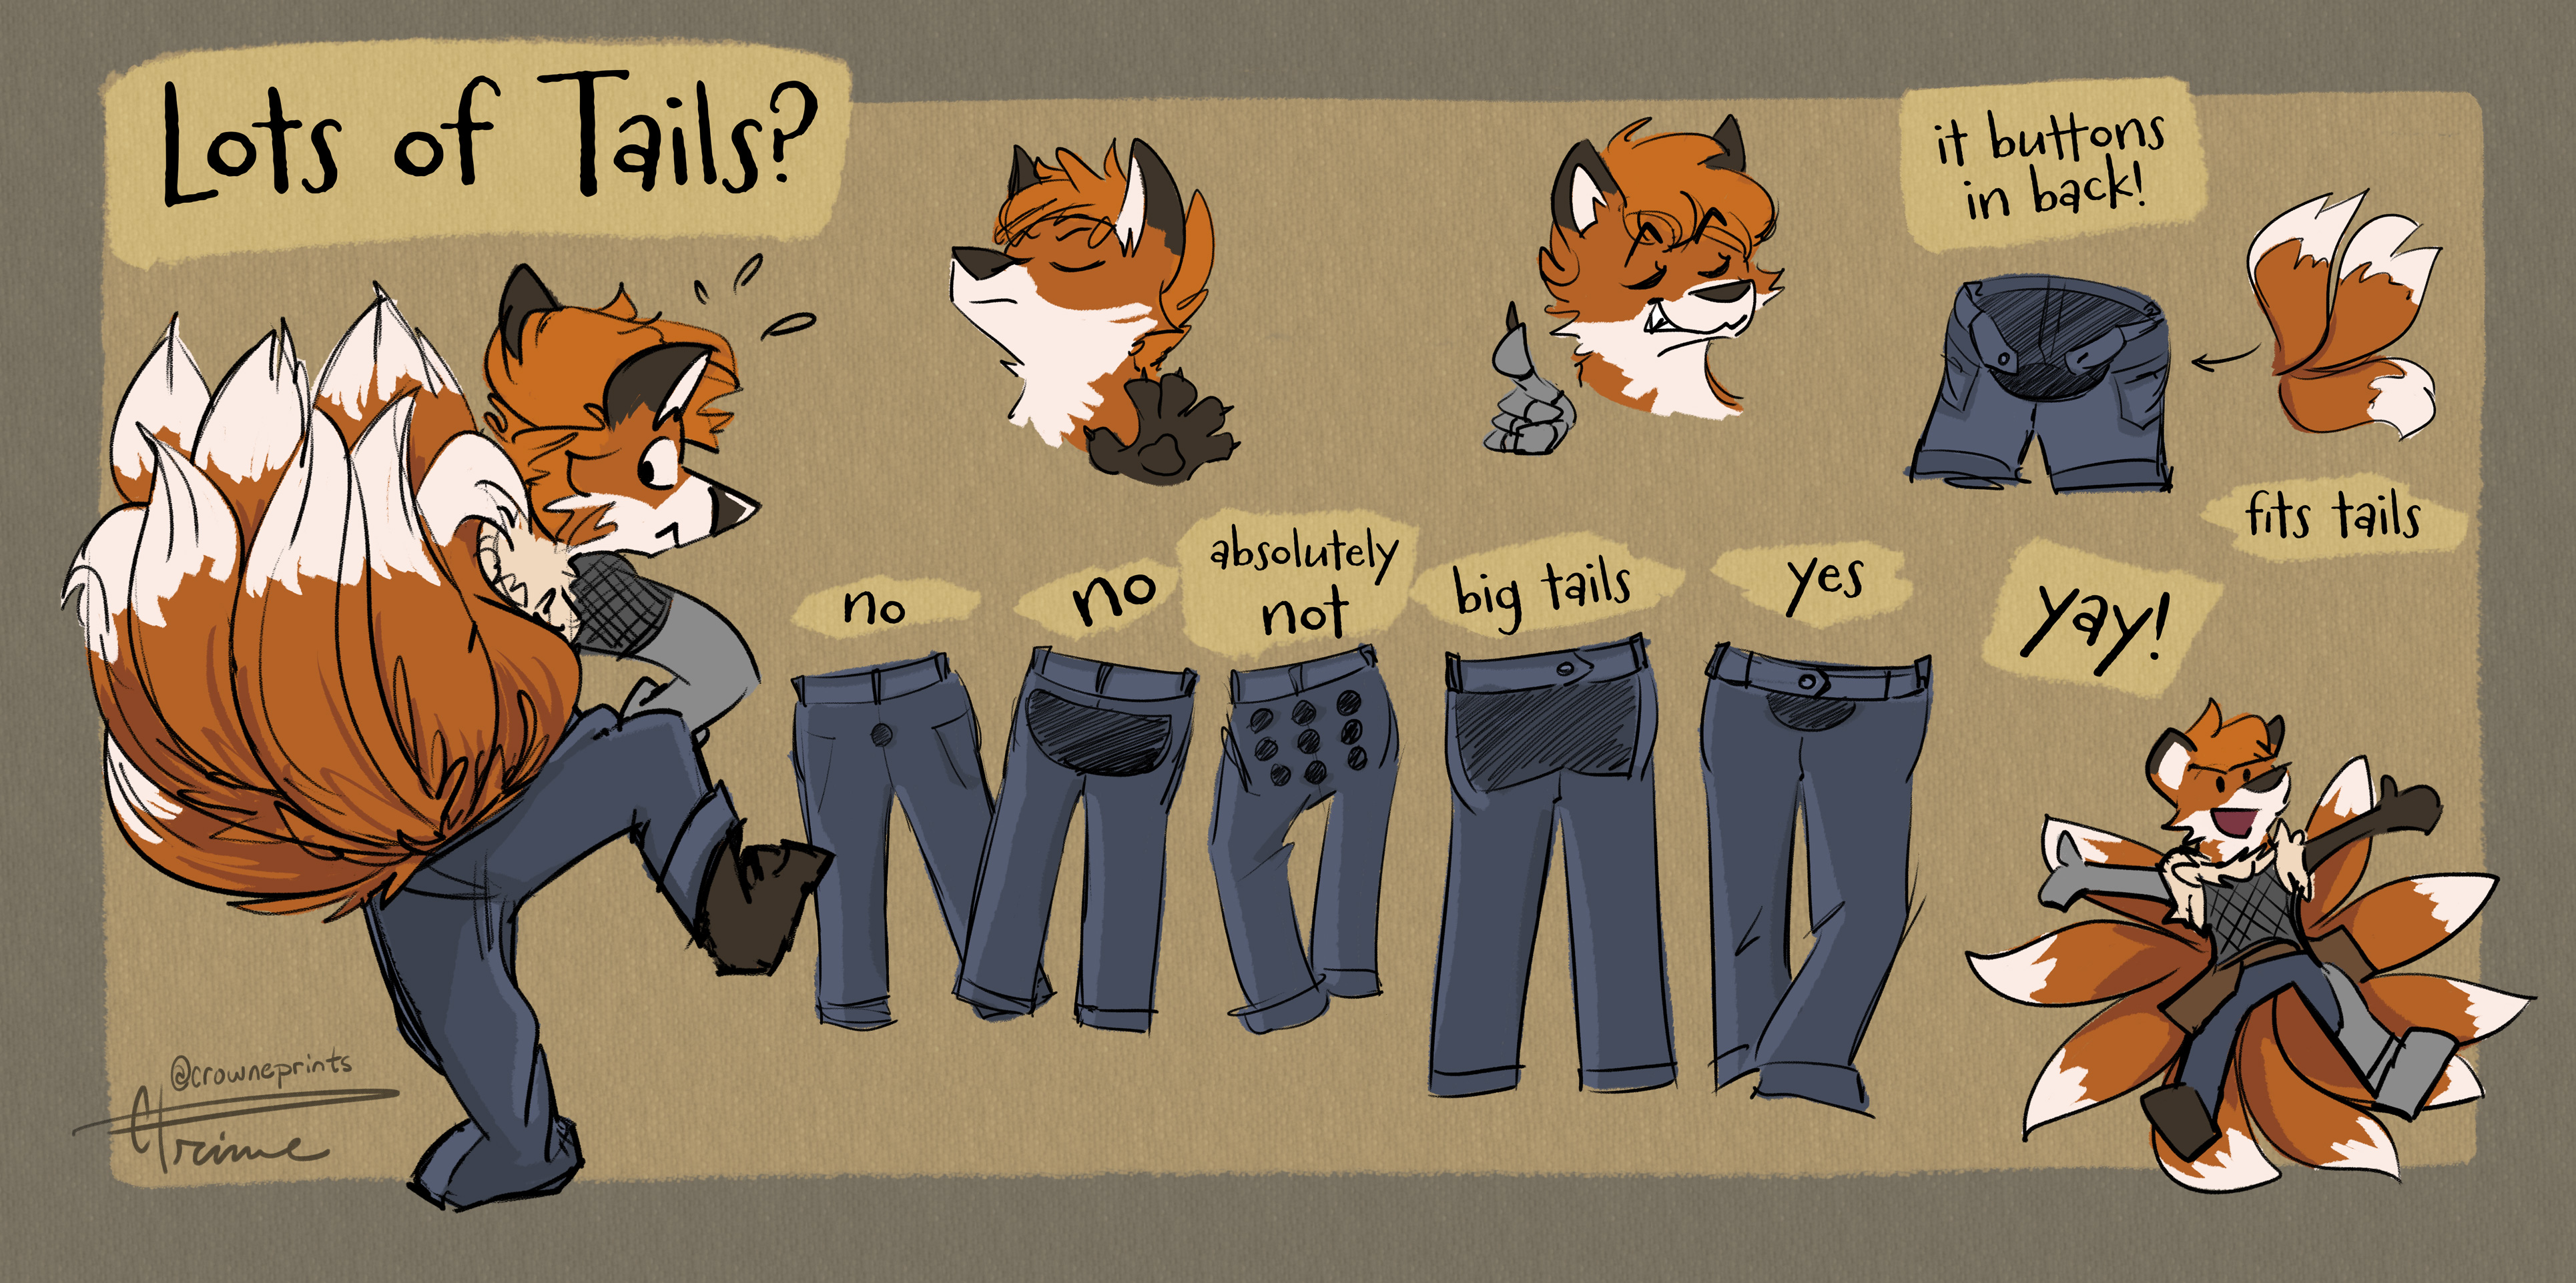 Helios Tail Pants by CrownePrince on DeviantArt